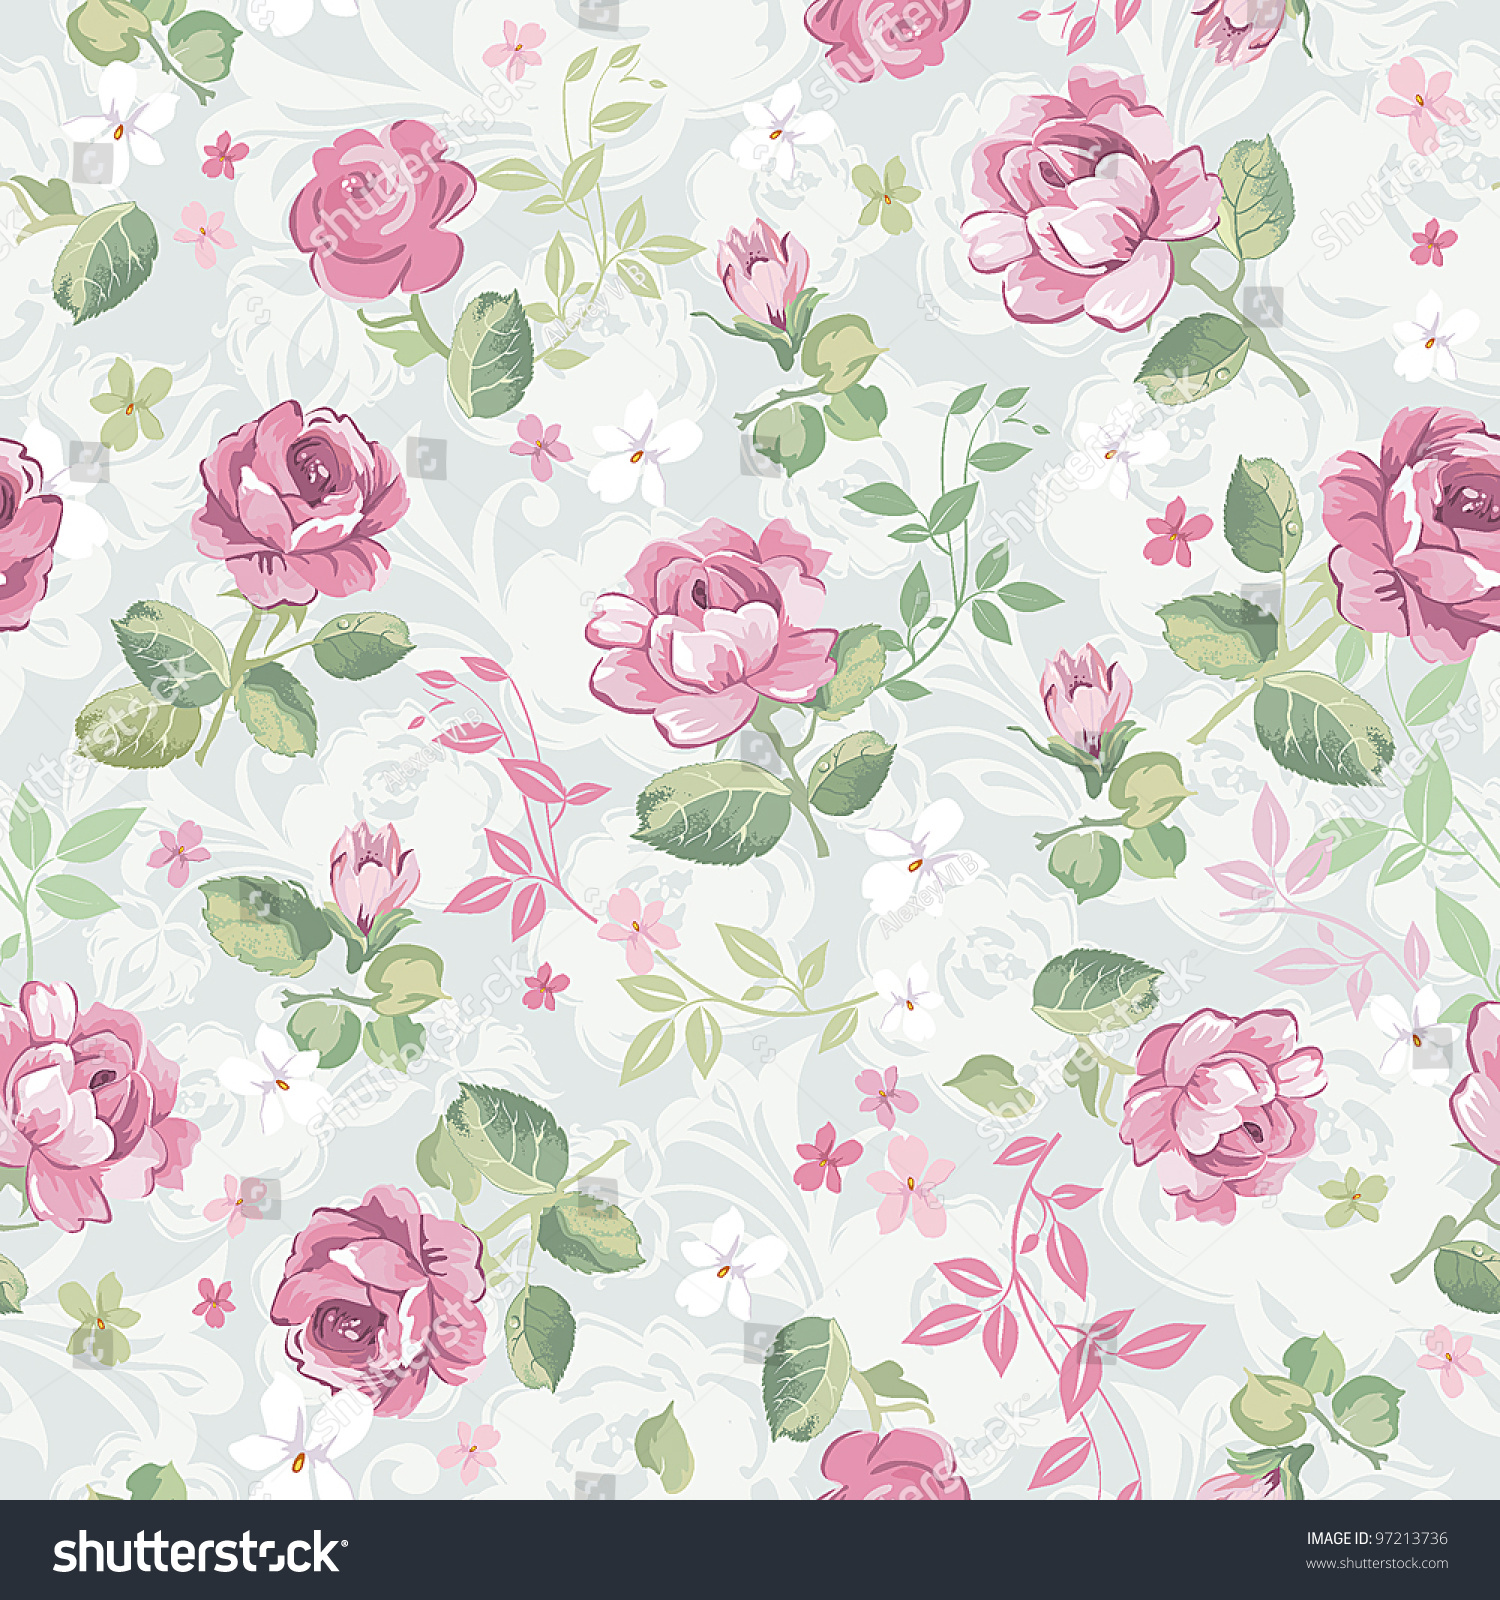 Abstract Elegance Seamless Floral Pattern Beautiful Stock Vector ...